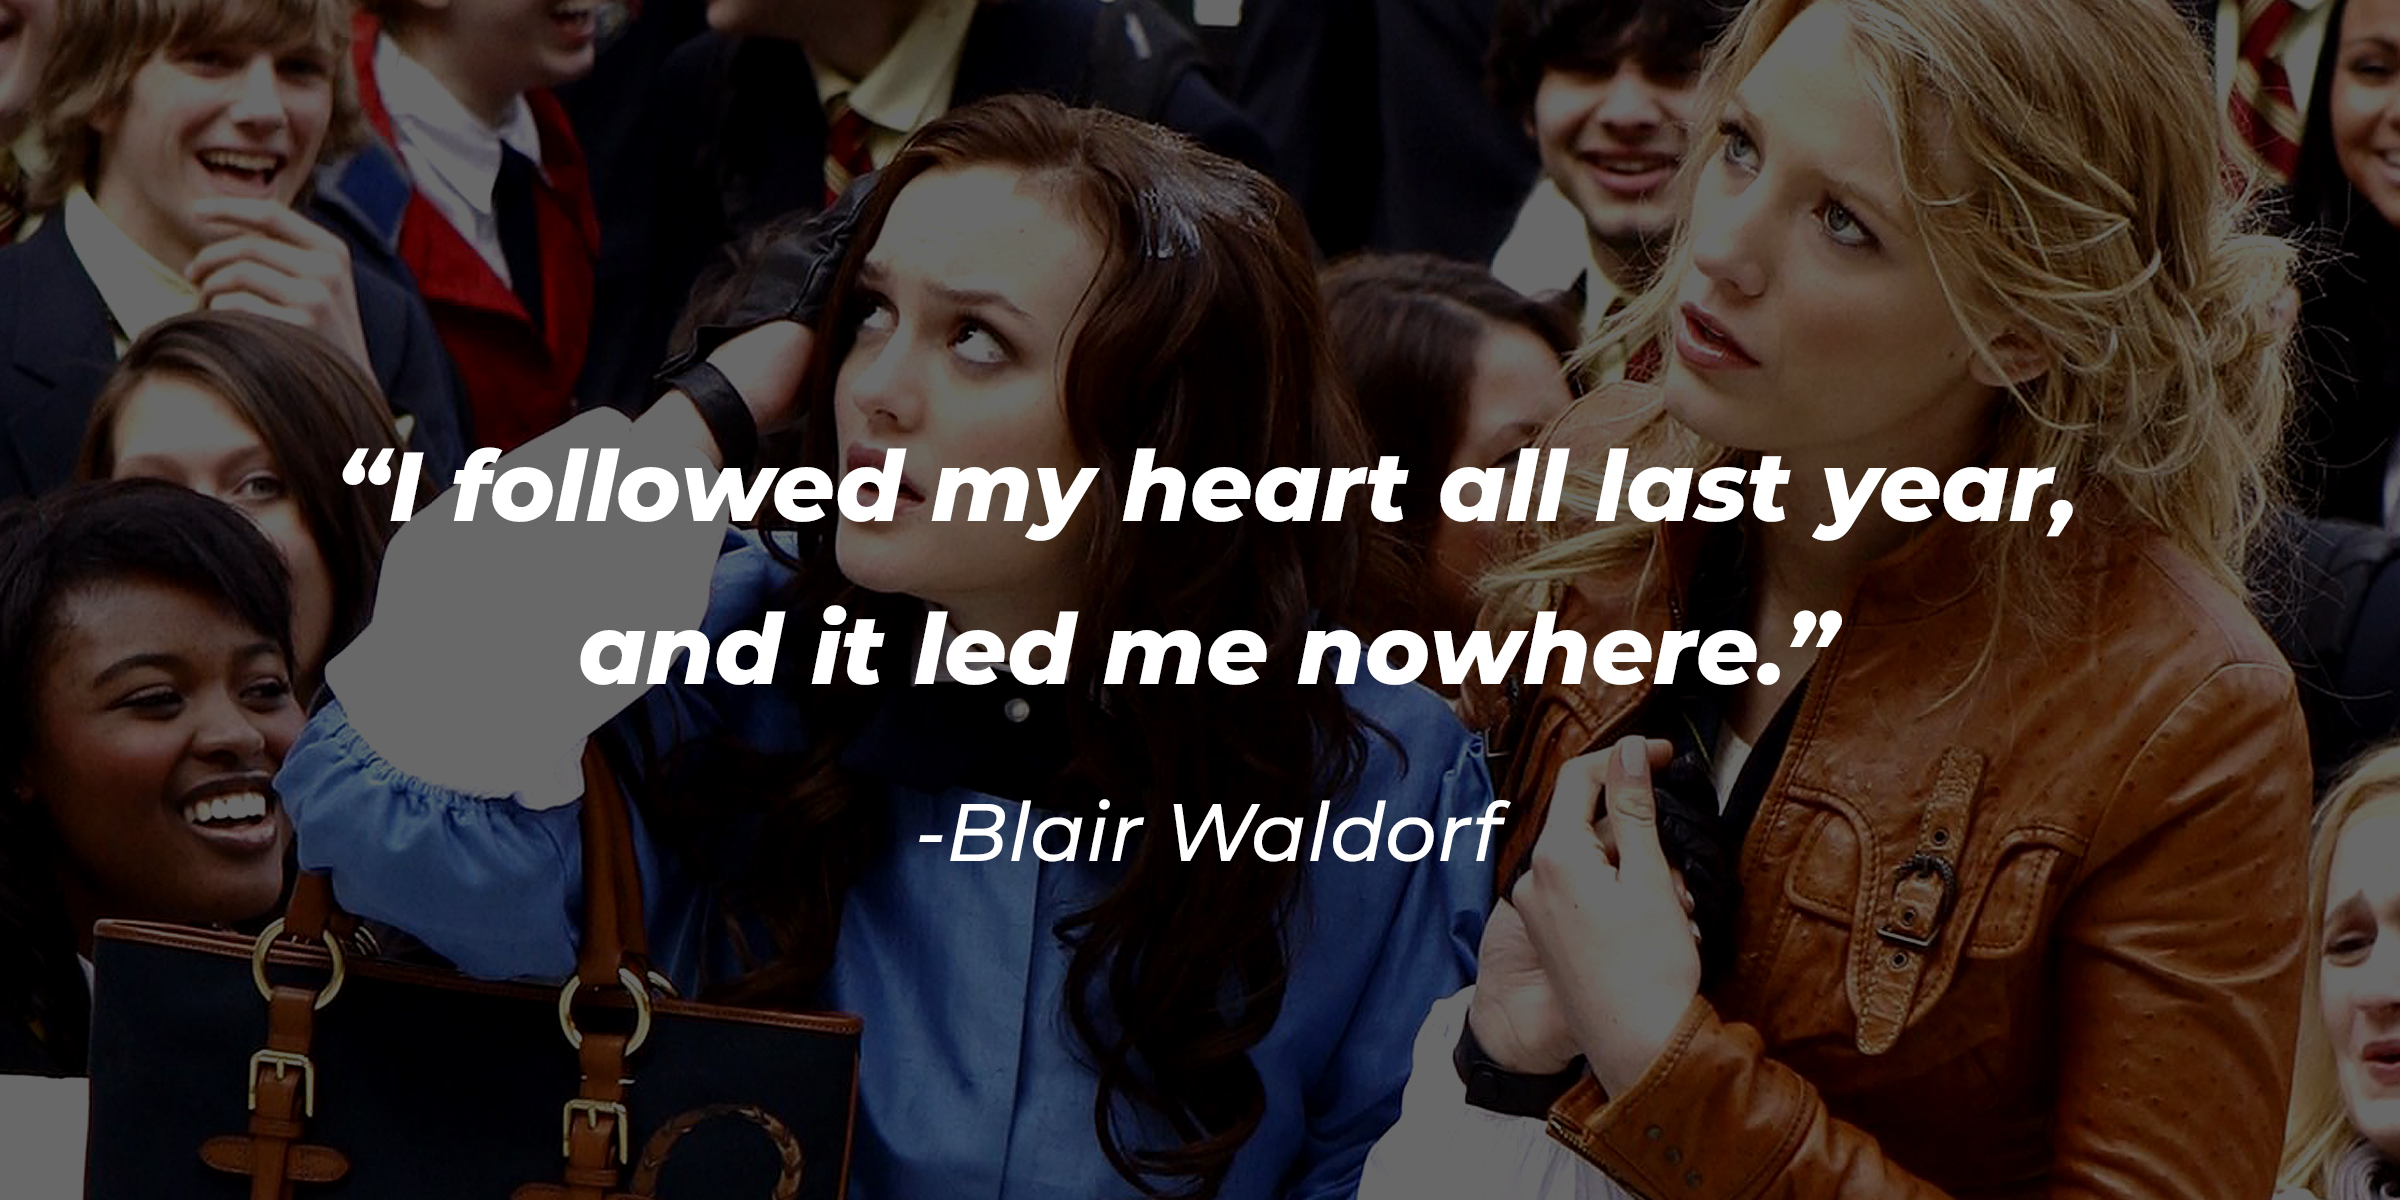 "Gossip Girl" characters with Blair Waldorf's quote: “I followed my heart all last year, and it led me nowhere.” | Source: Facebook.com/GossipGirl